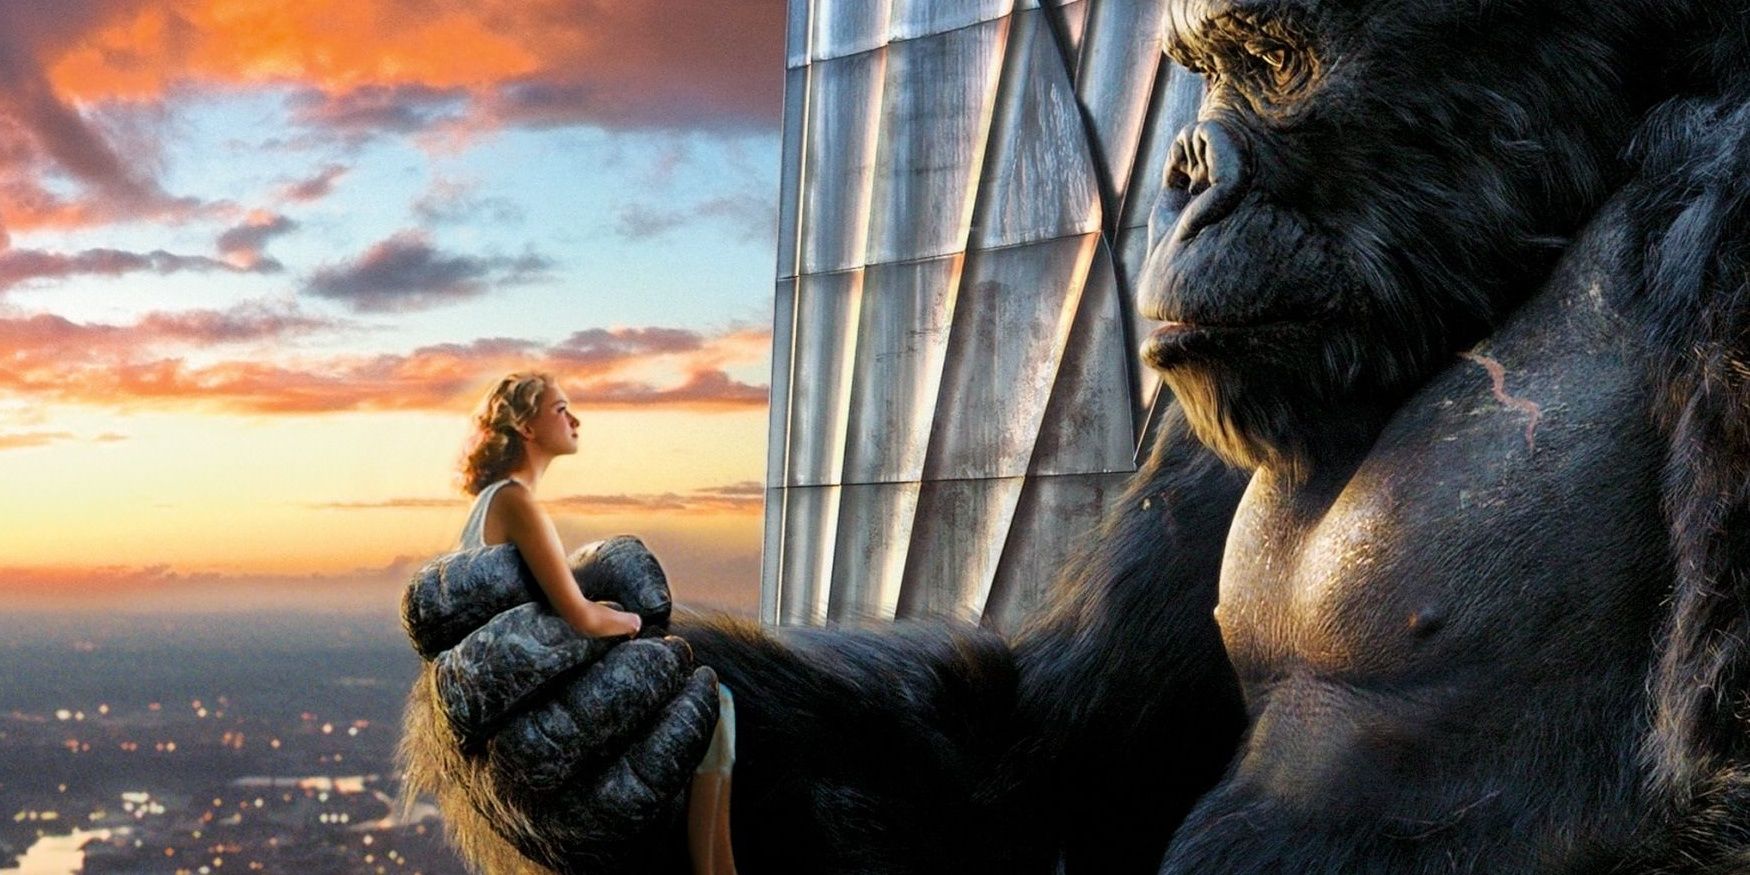 King Kong and Anne Darrow (Naomi Watts) on top the Empire State Building in Peter Jackson's King Kong (2005)